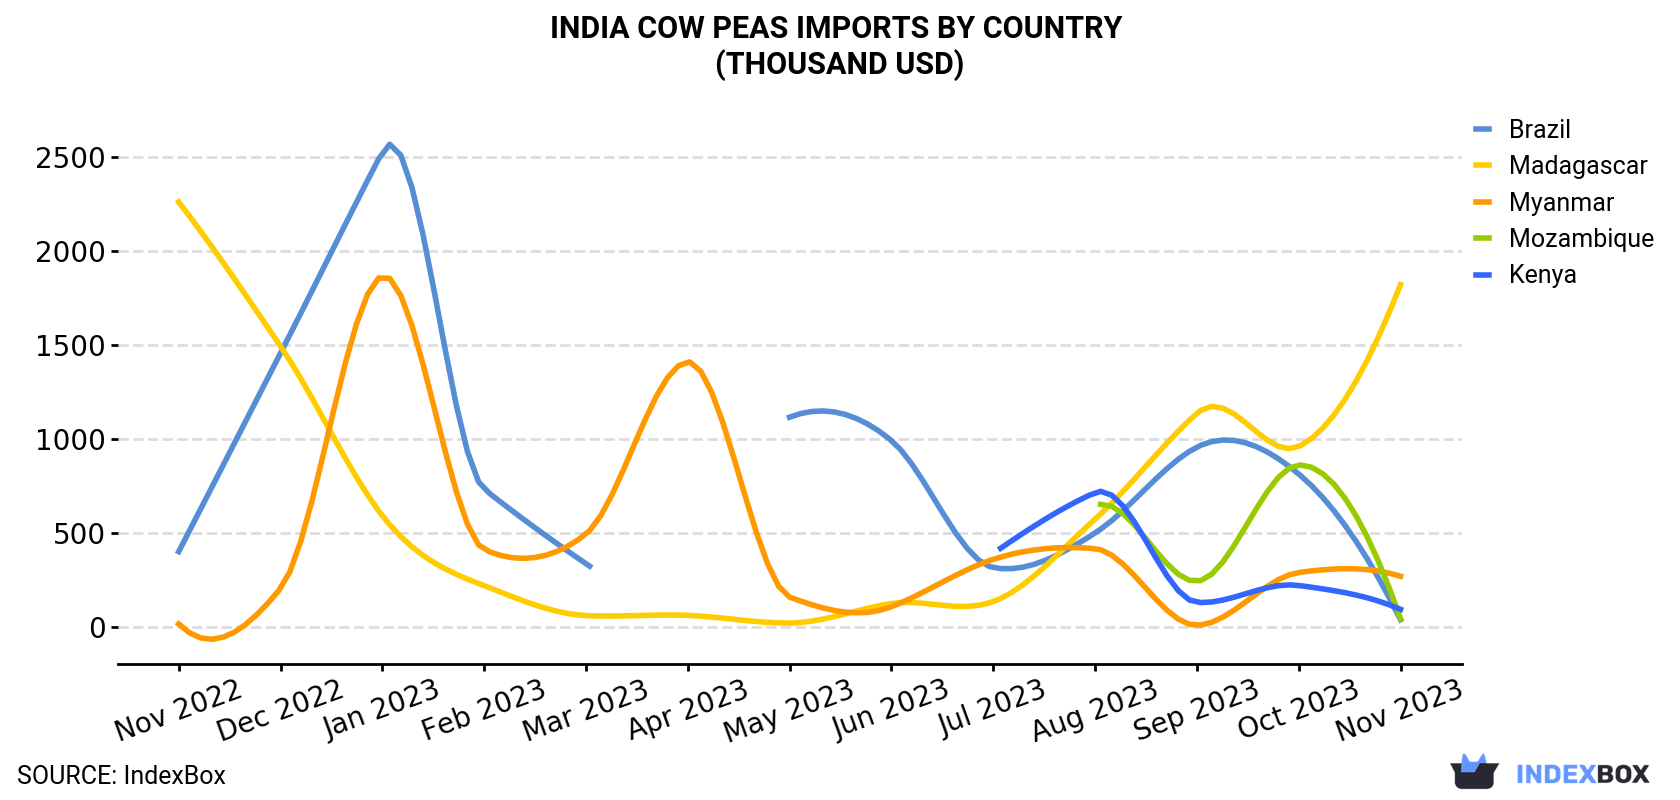 India Cow Peas Imports By Country (Thousand USD)